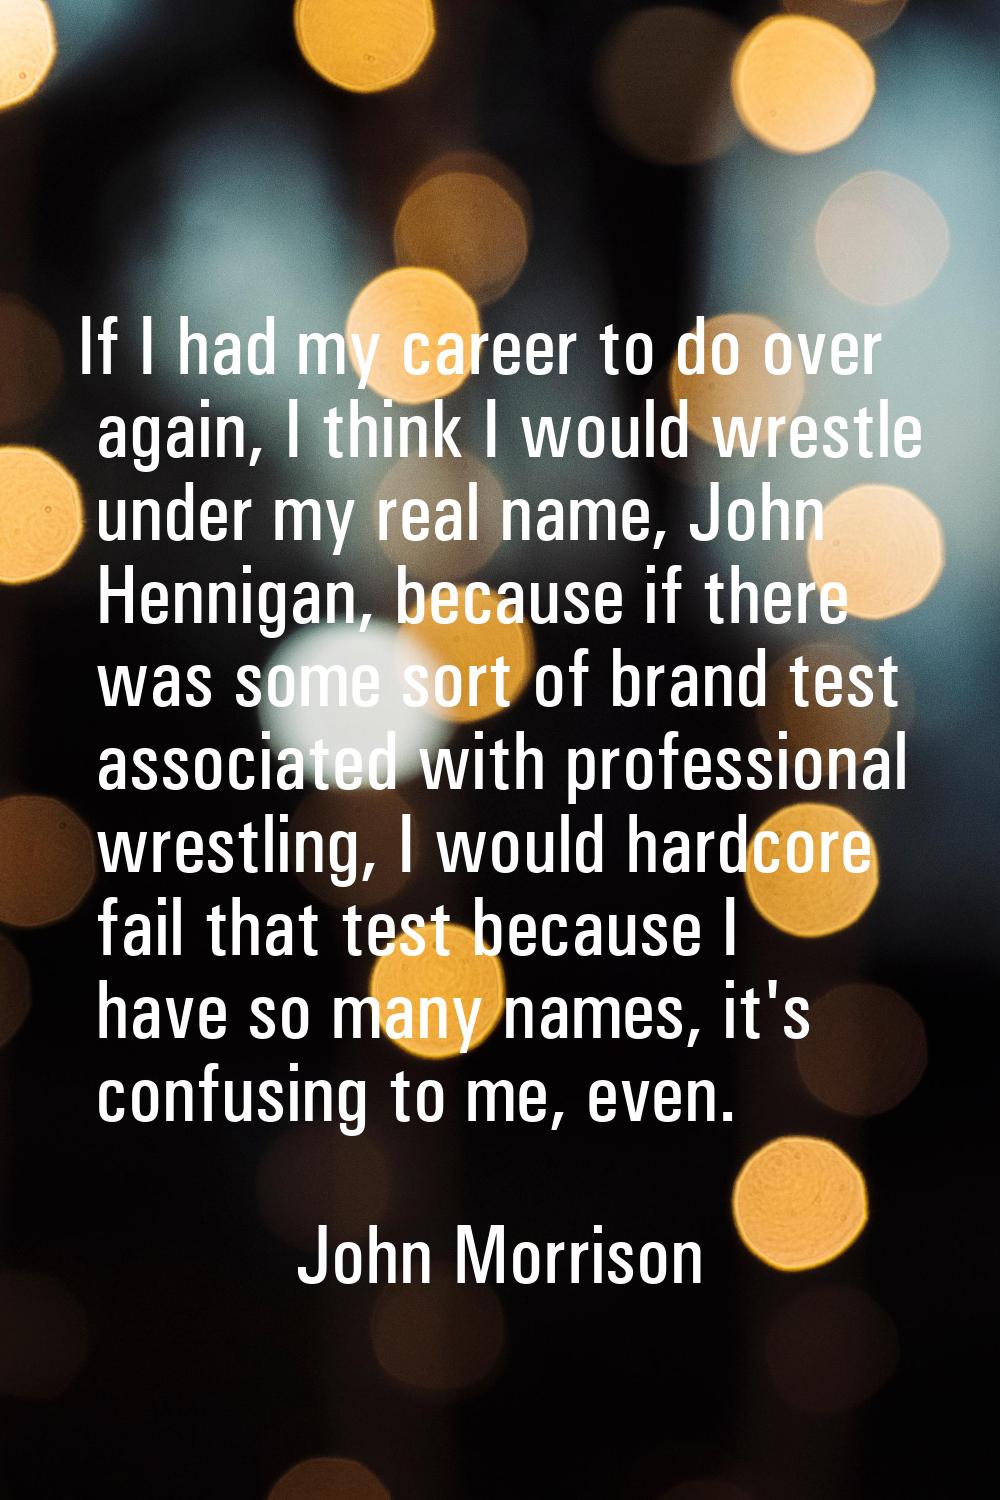 If I had my career to do over again, I think I would wrestle under my real name, John Hennigan, bec